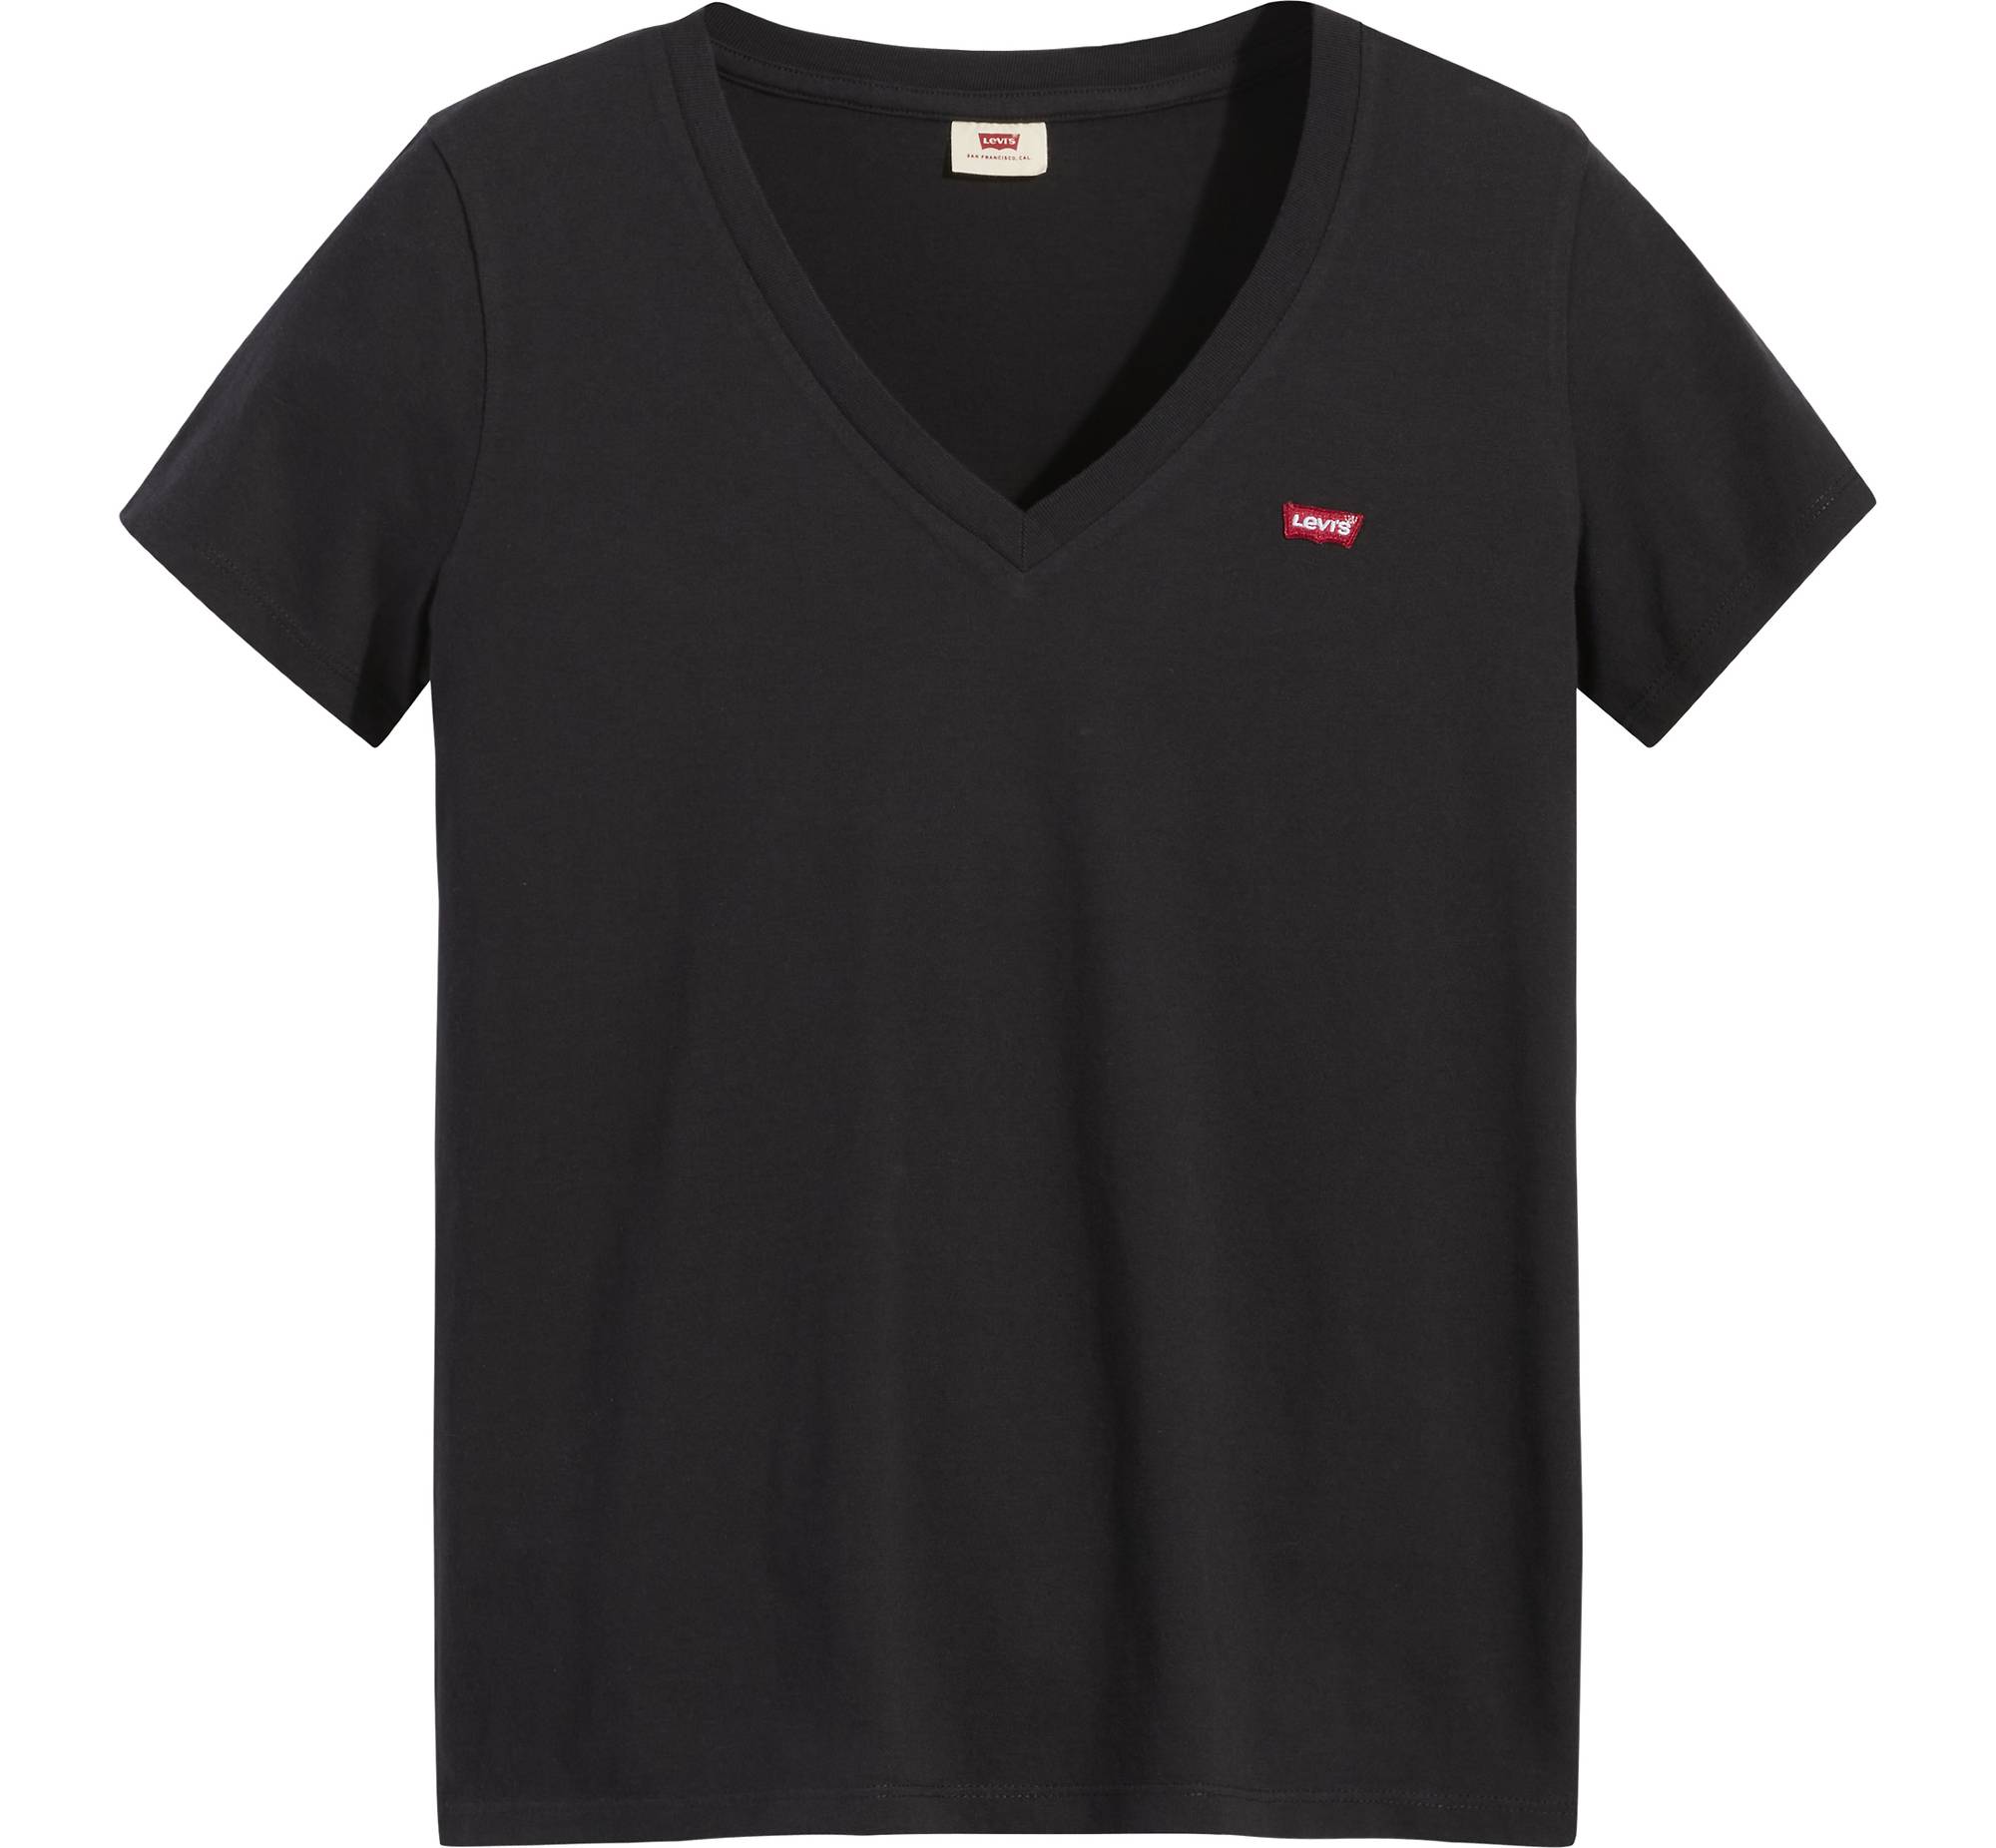 The Perfect Tee V-Neck 5